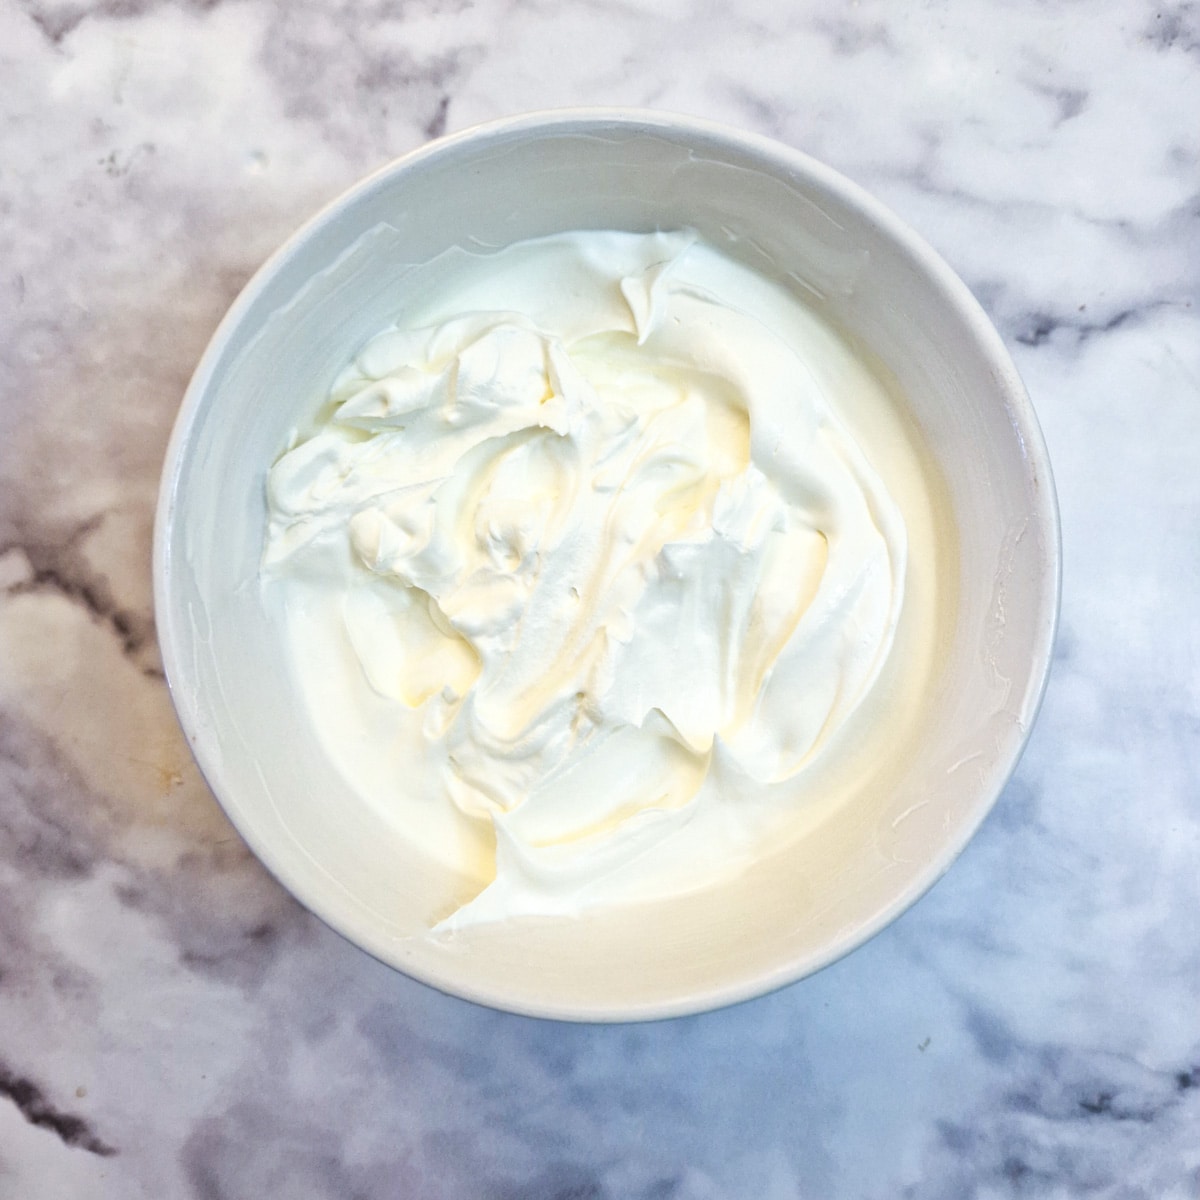 Whipped cream in a small white bowl.